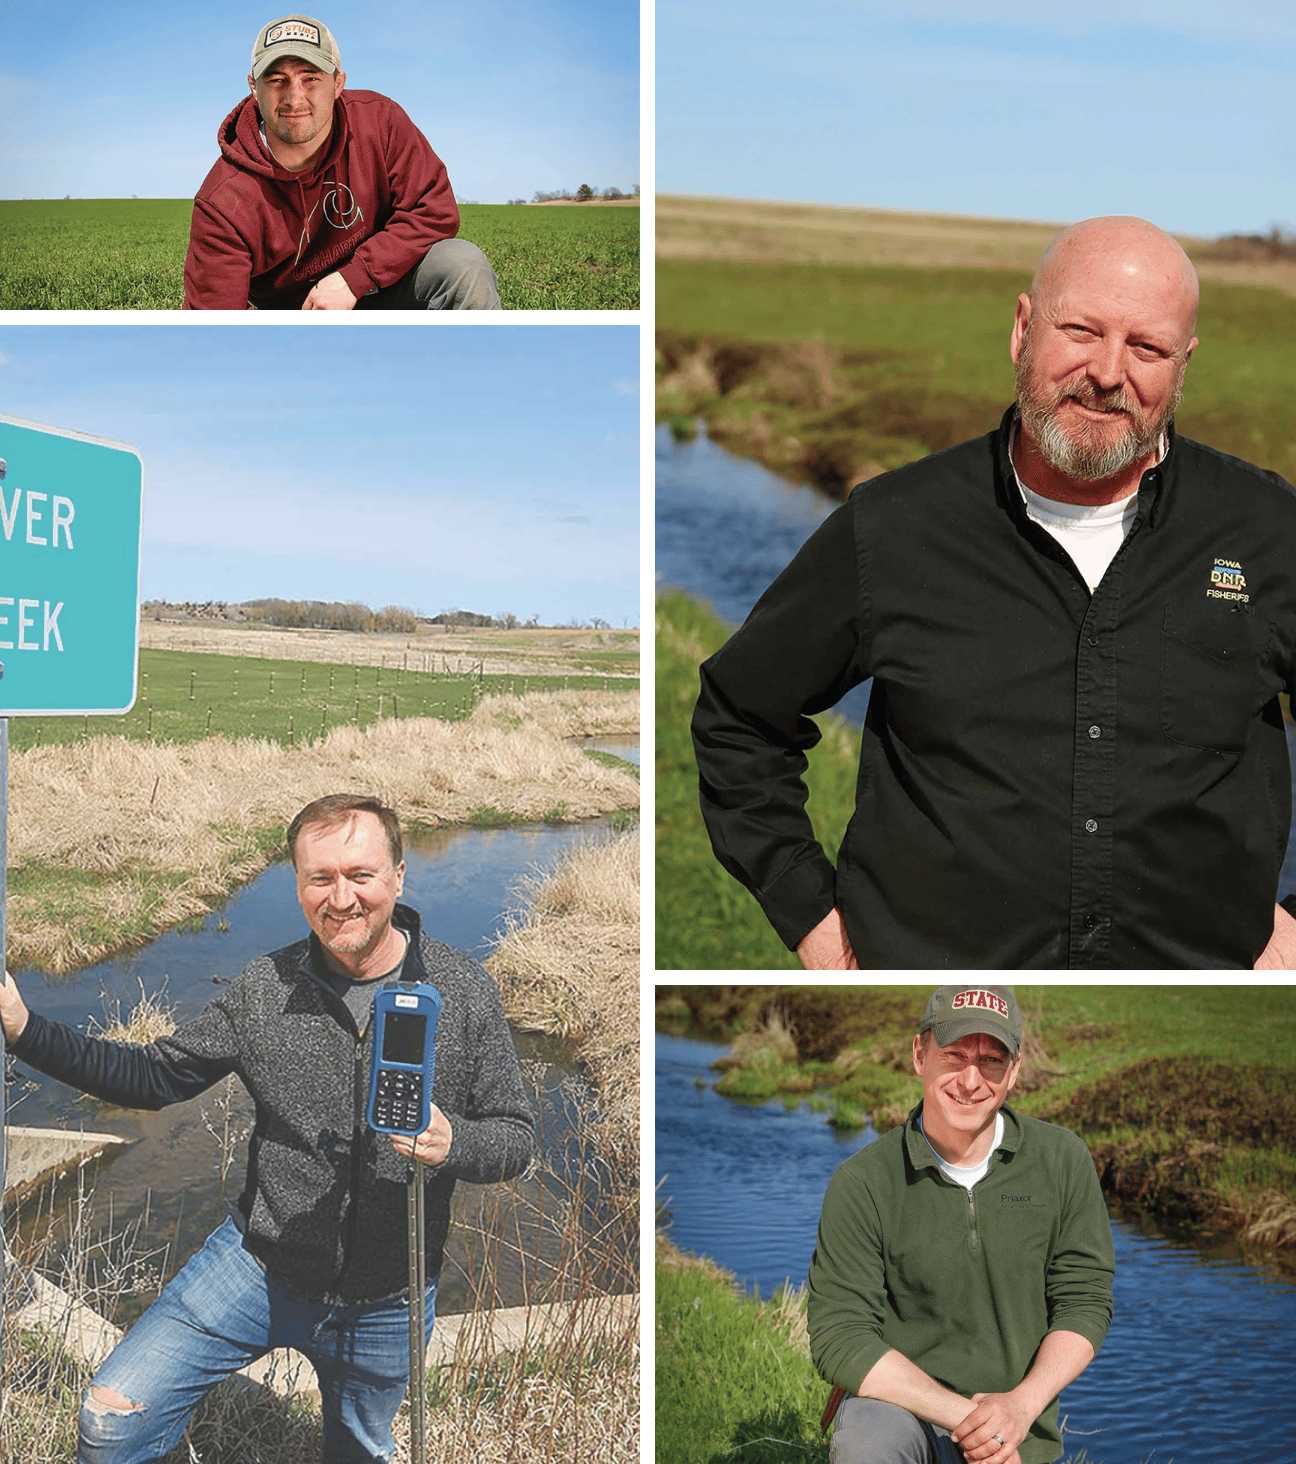 Above, clockwise from top-left: Hunter Slifka has seen cover crop plantings quadruple in the Turkey River watershed. Mike Steuck says practices that control erosion are critical for trout habitat. Brandon Reis believes brook trout provide a barometer of environmental stewardship. Neil Shaffer reports more than $8 million has been invested in conservation practices in Silver Creek watershed since 2012.